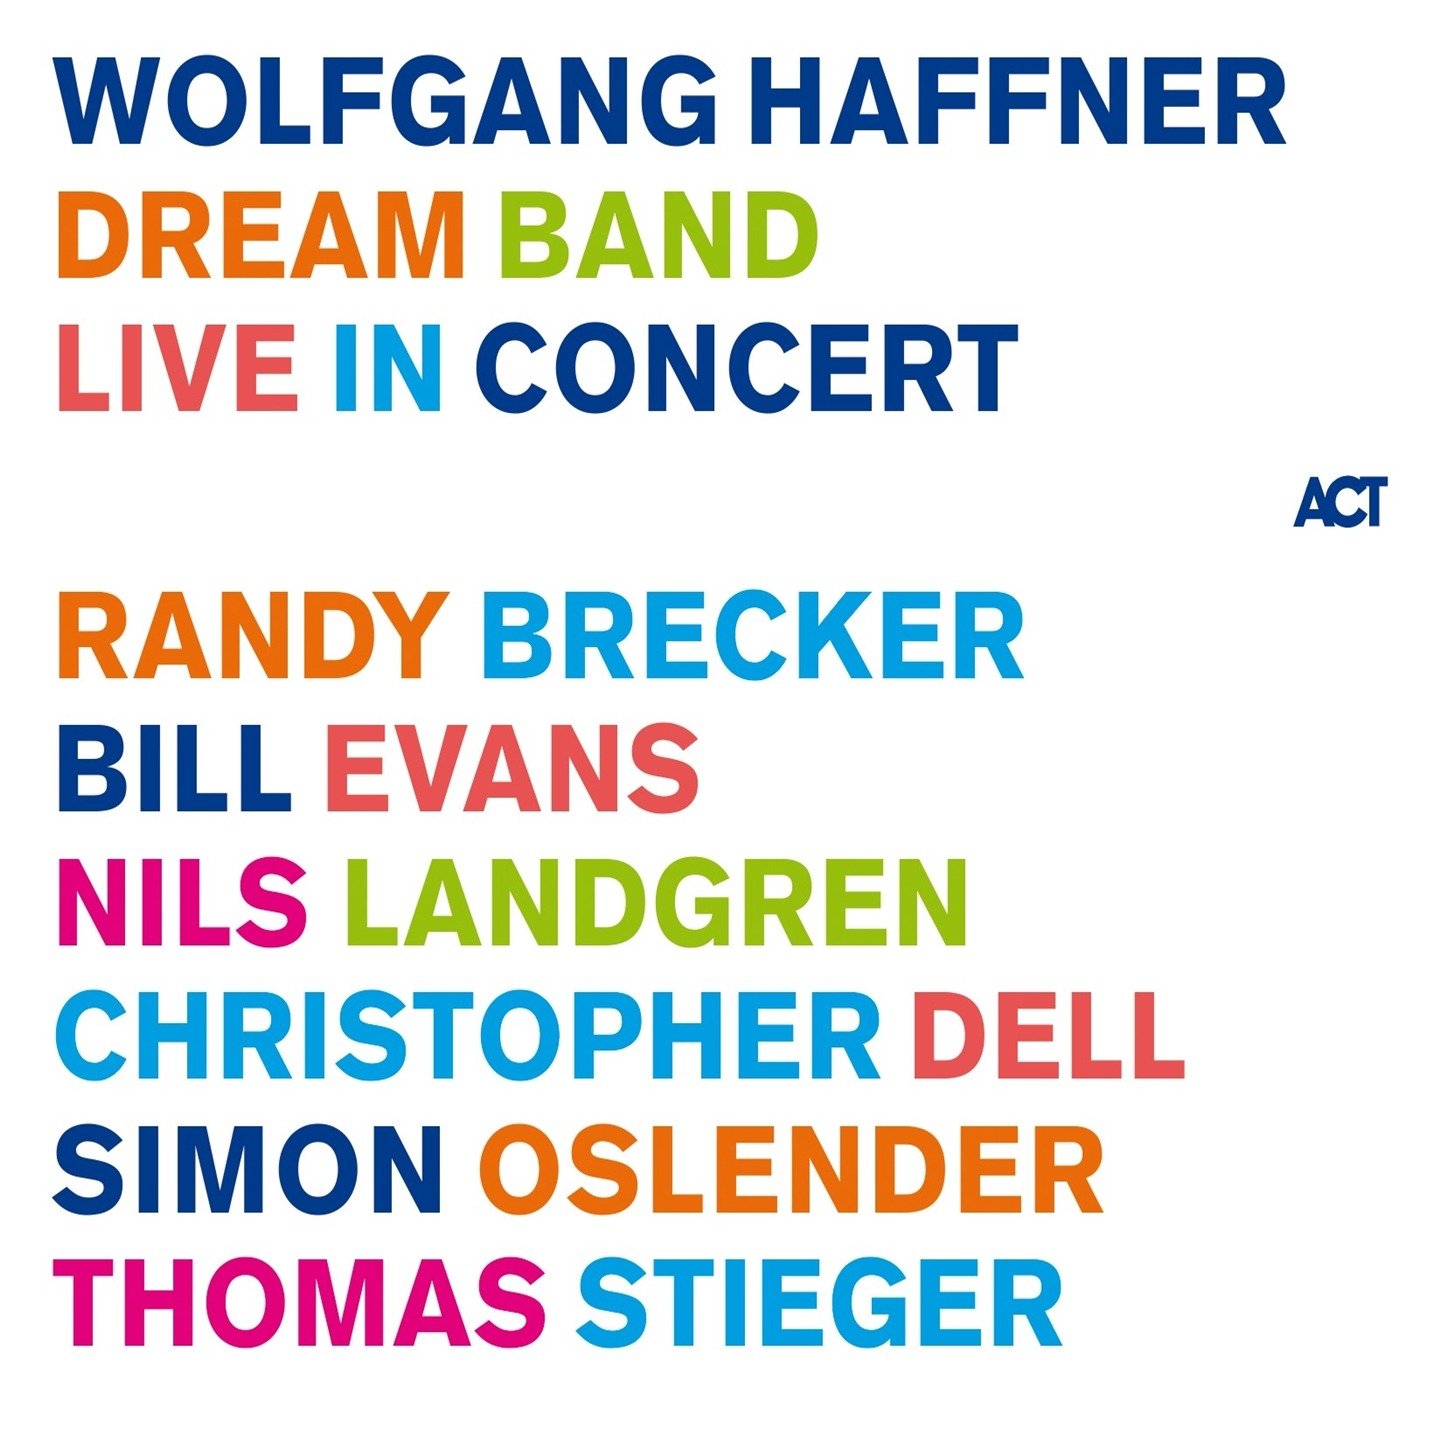 CD Shop - HAFFNER, WOLFGANG DREAM BAND LIVE IN CONCERT